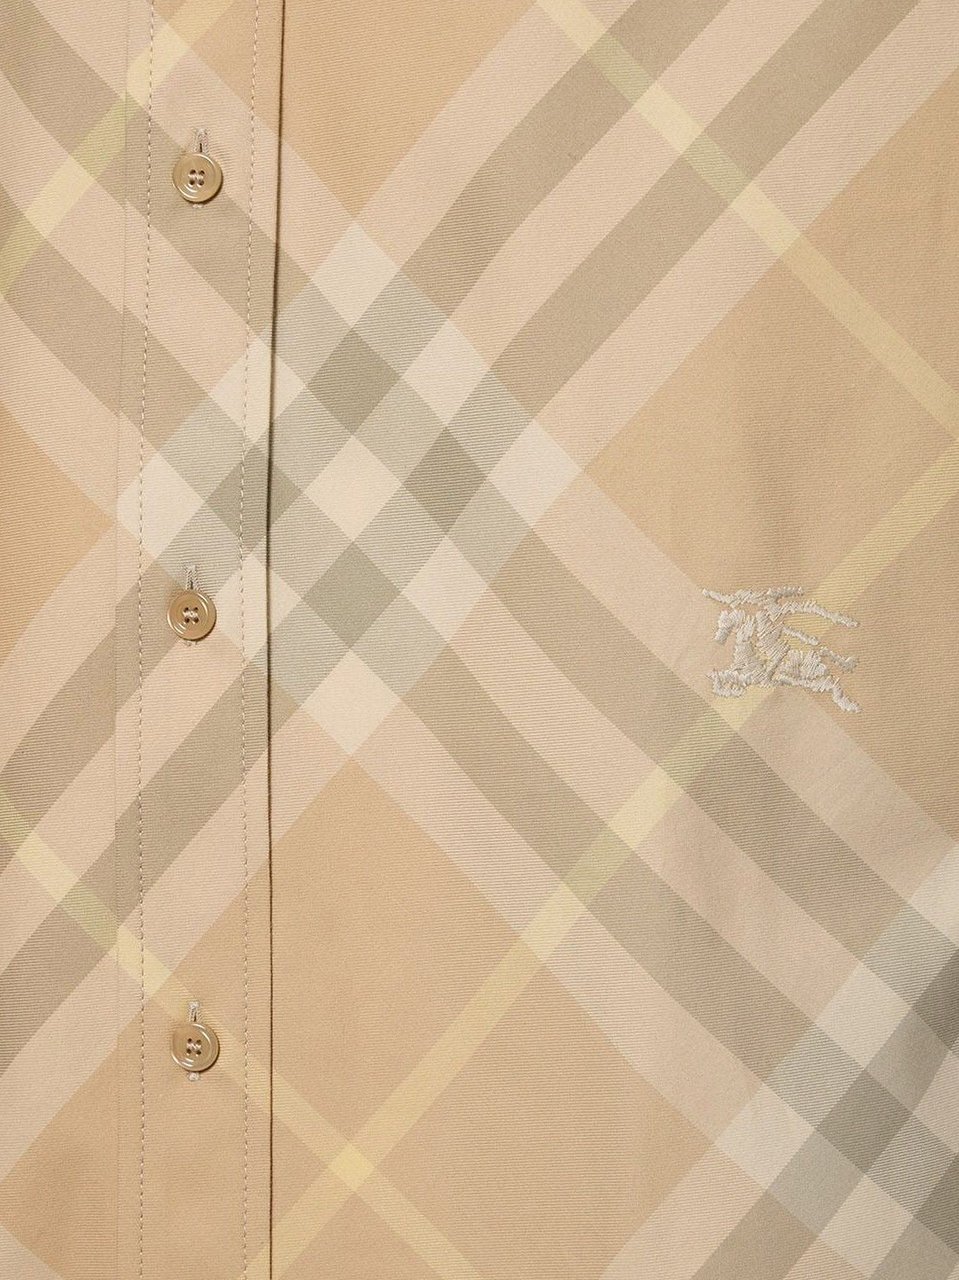 Burberry Cotton shirt with check motif Beige